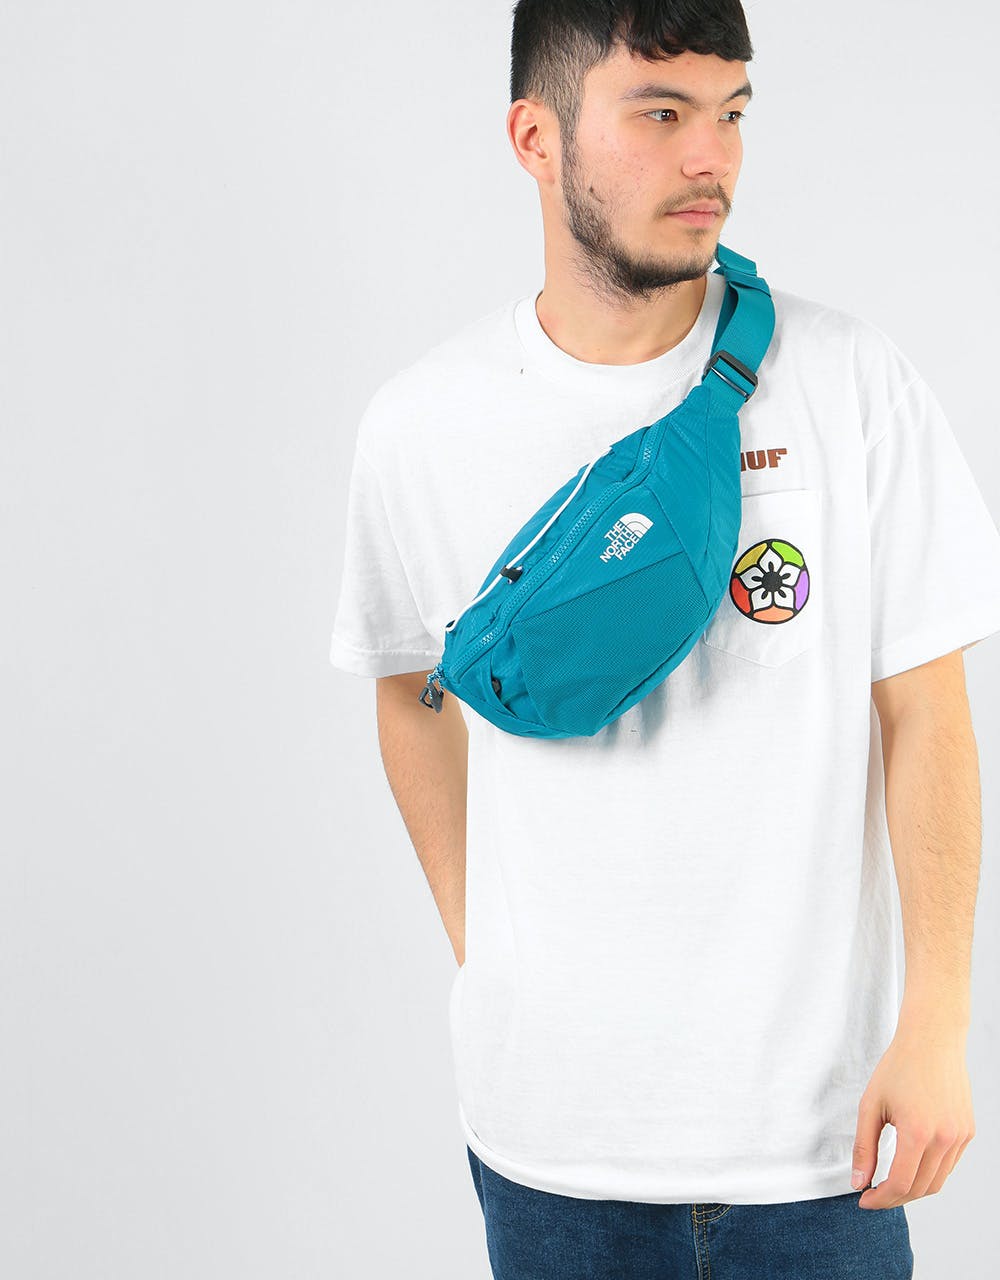 The North Face Lumbnical Cross Body Bag - Crystal Teal/TNF White